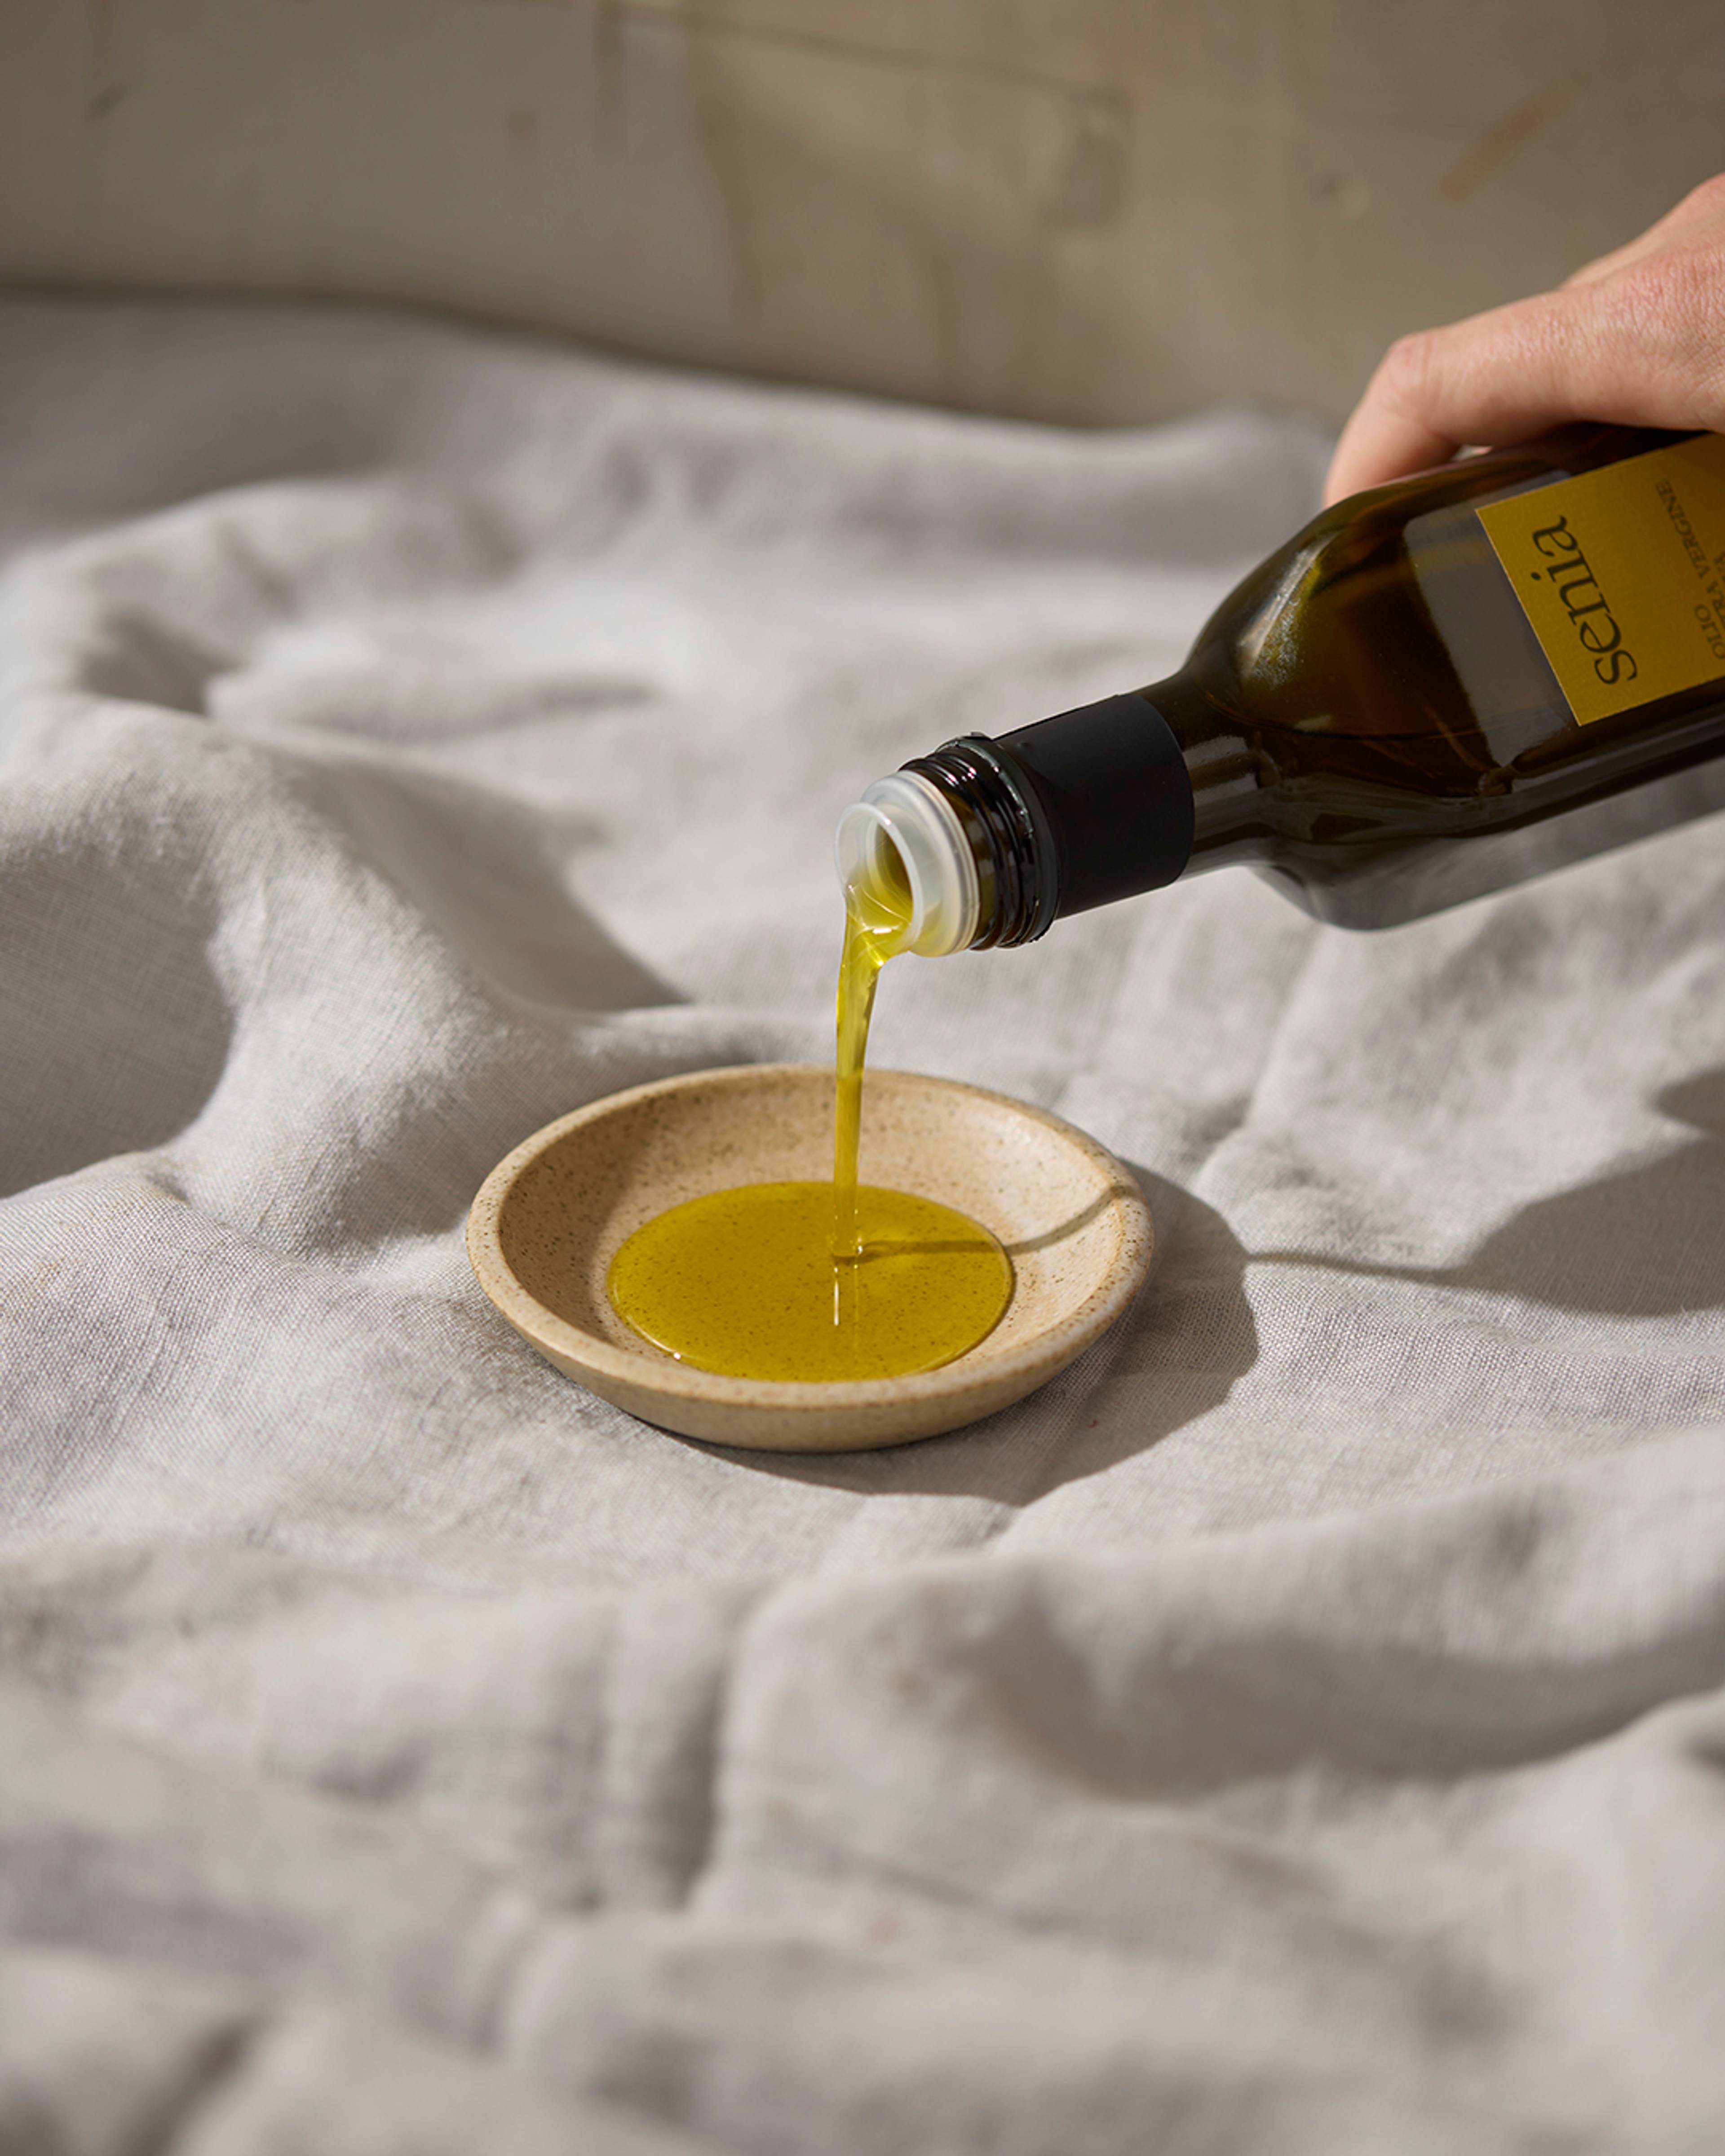 senia olive oil being poured onto a small plate